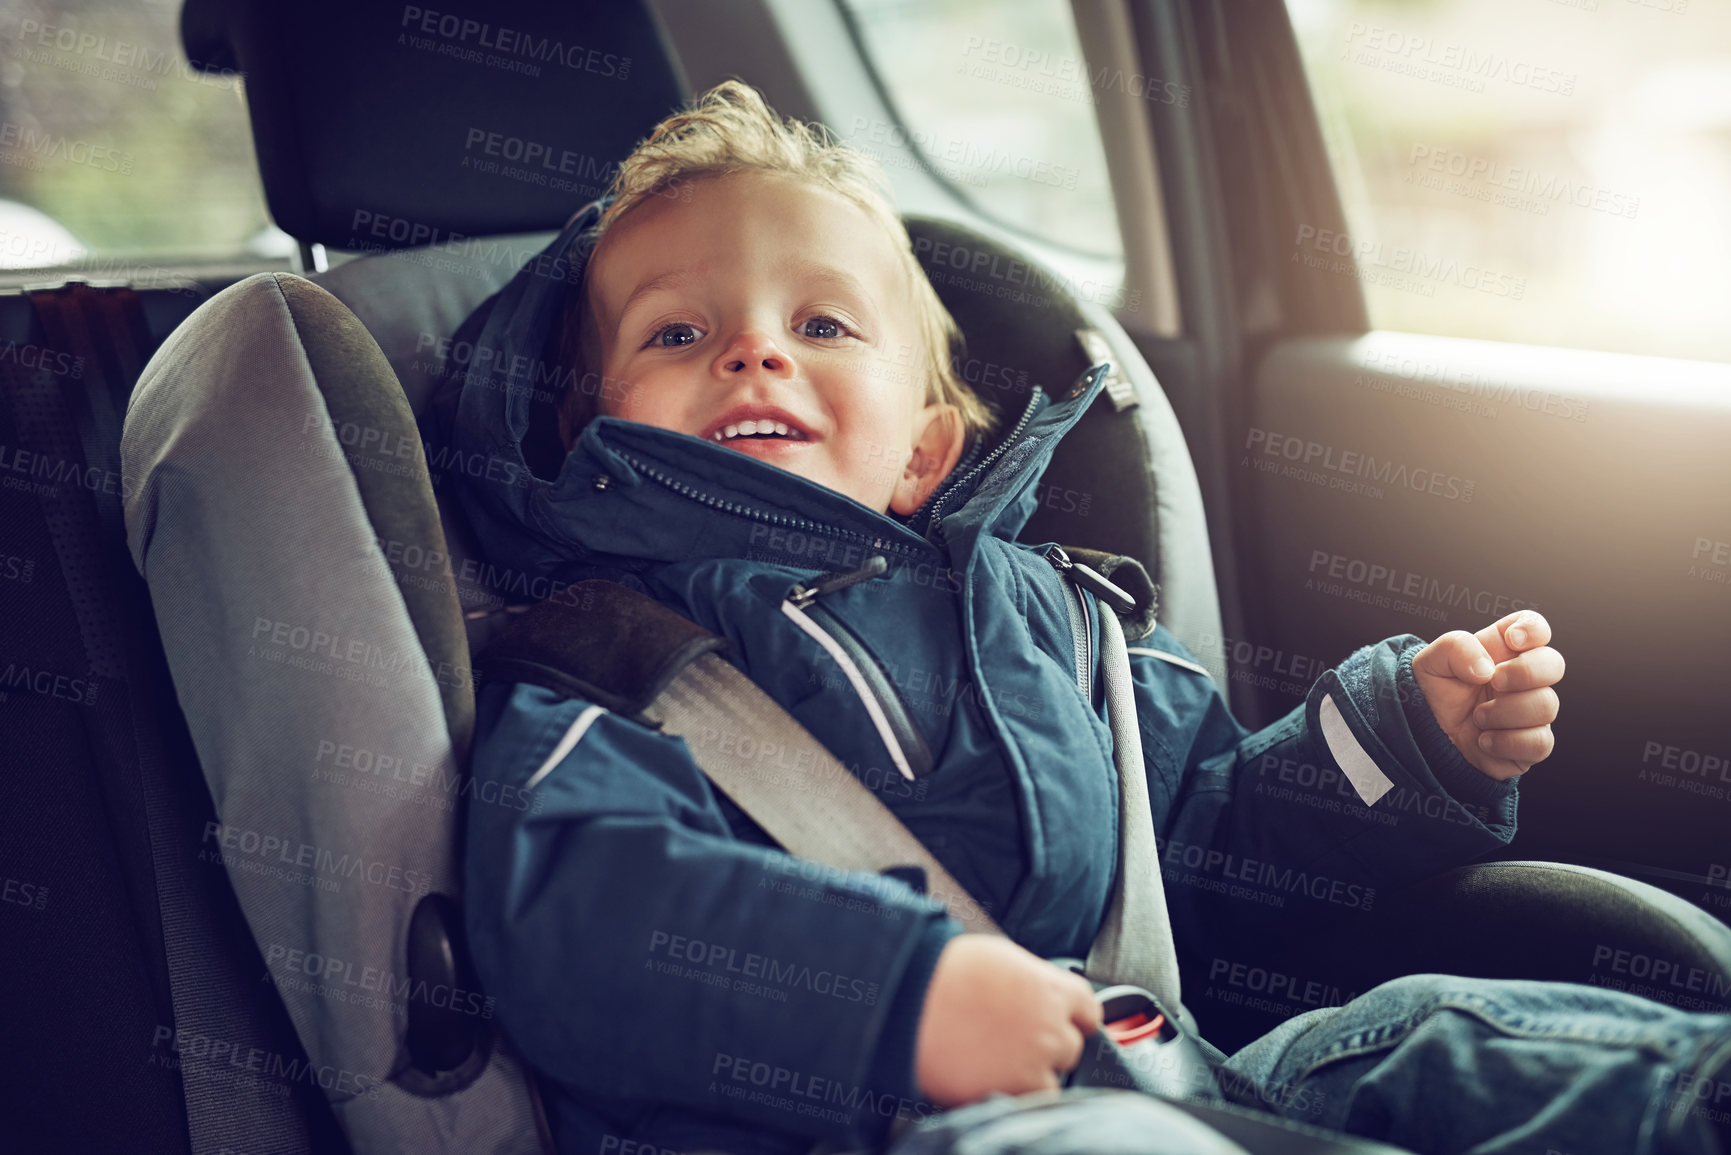 Buy stock photo Portrait of an adorable little boy sitting in a car seat